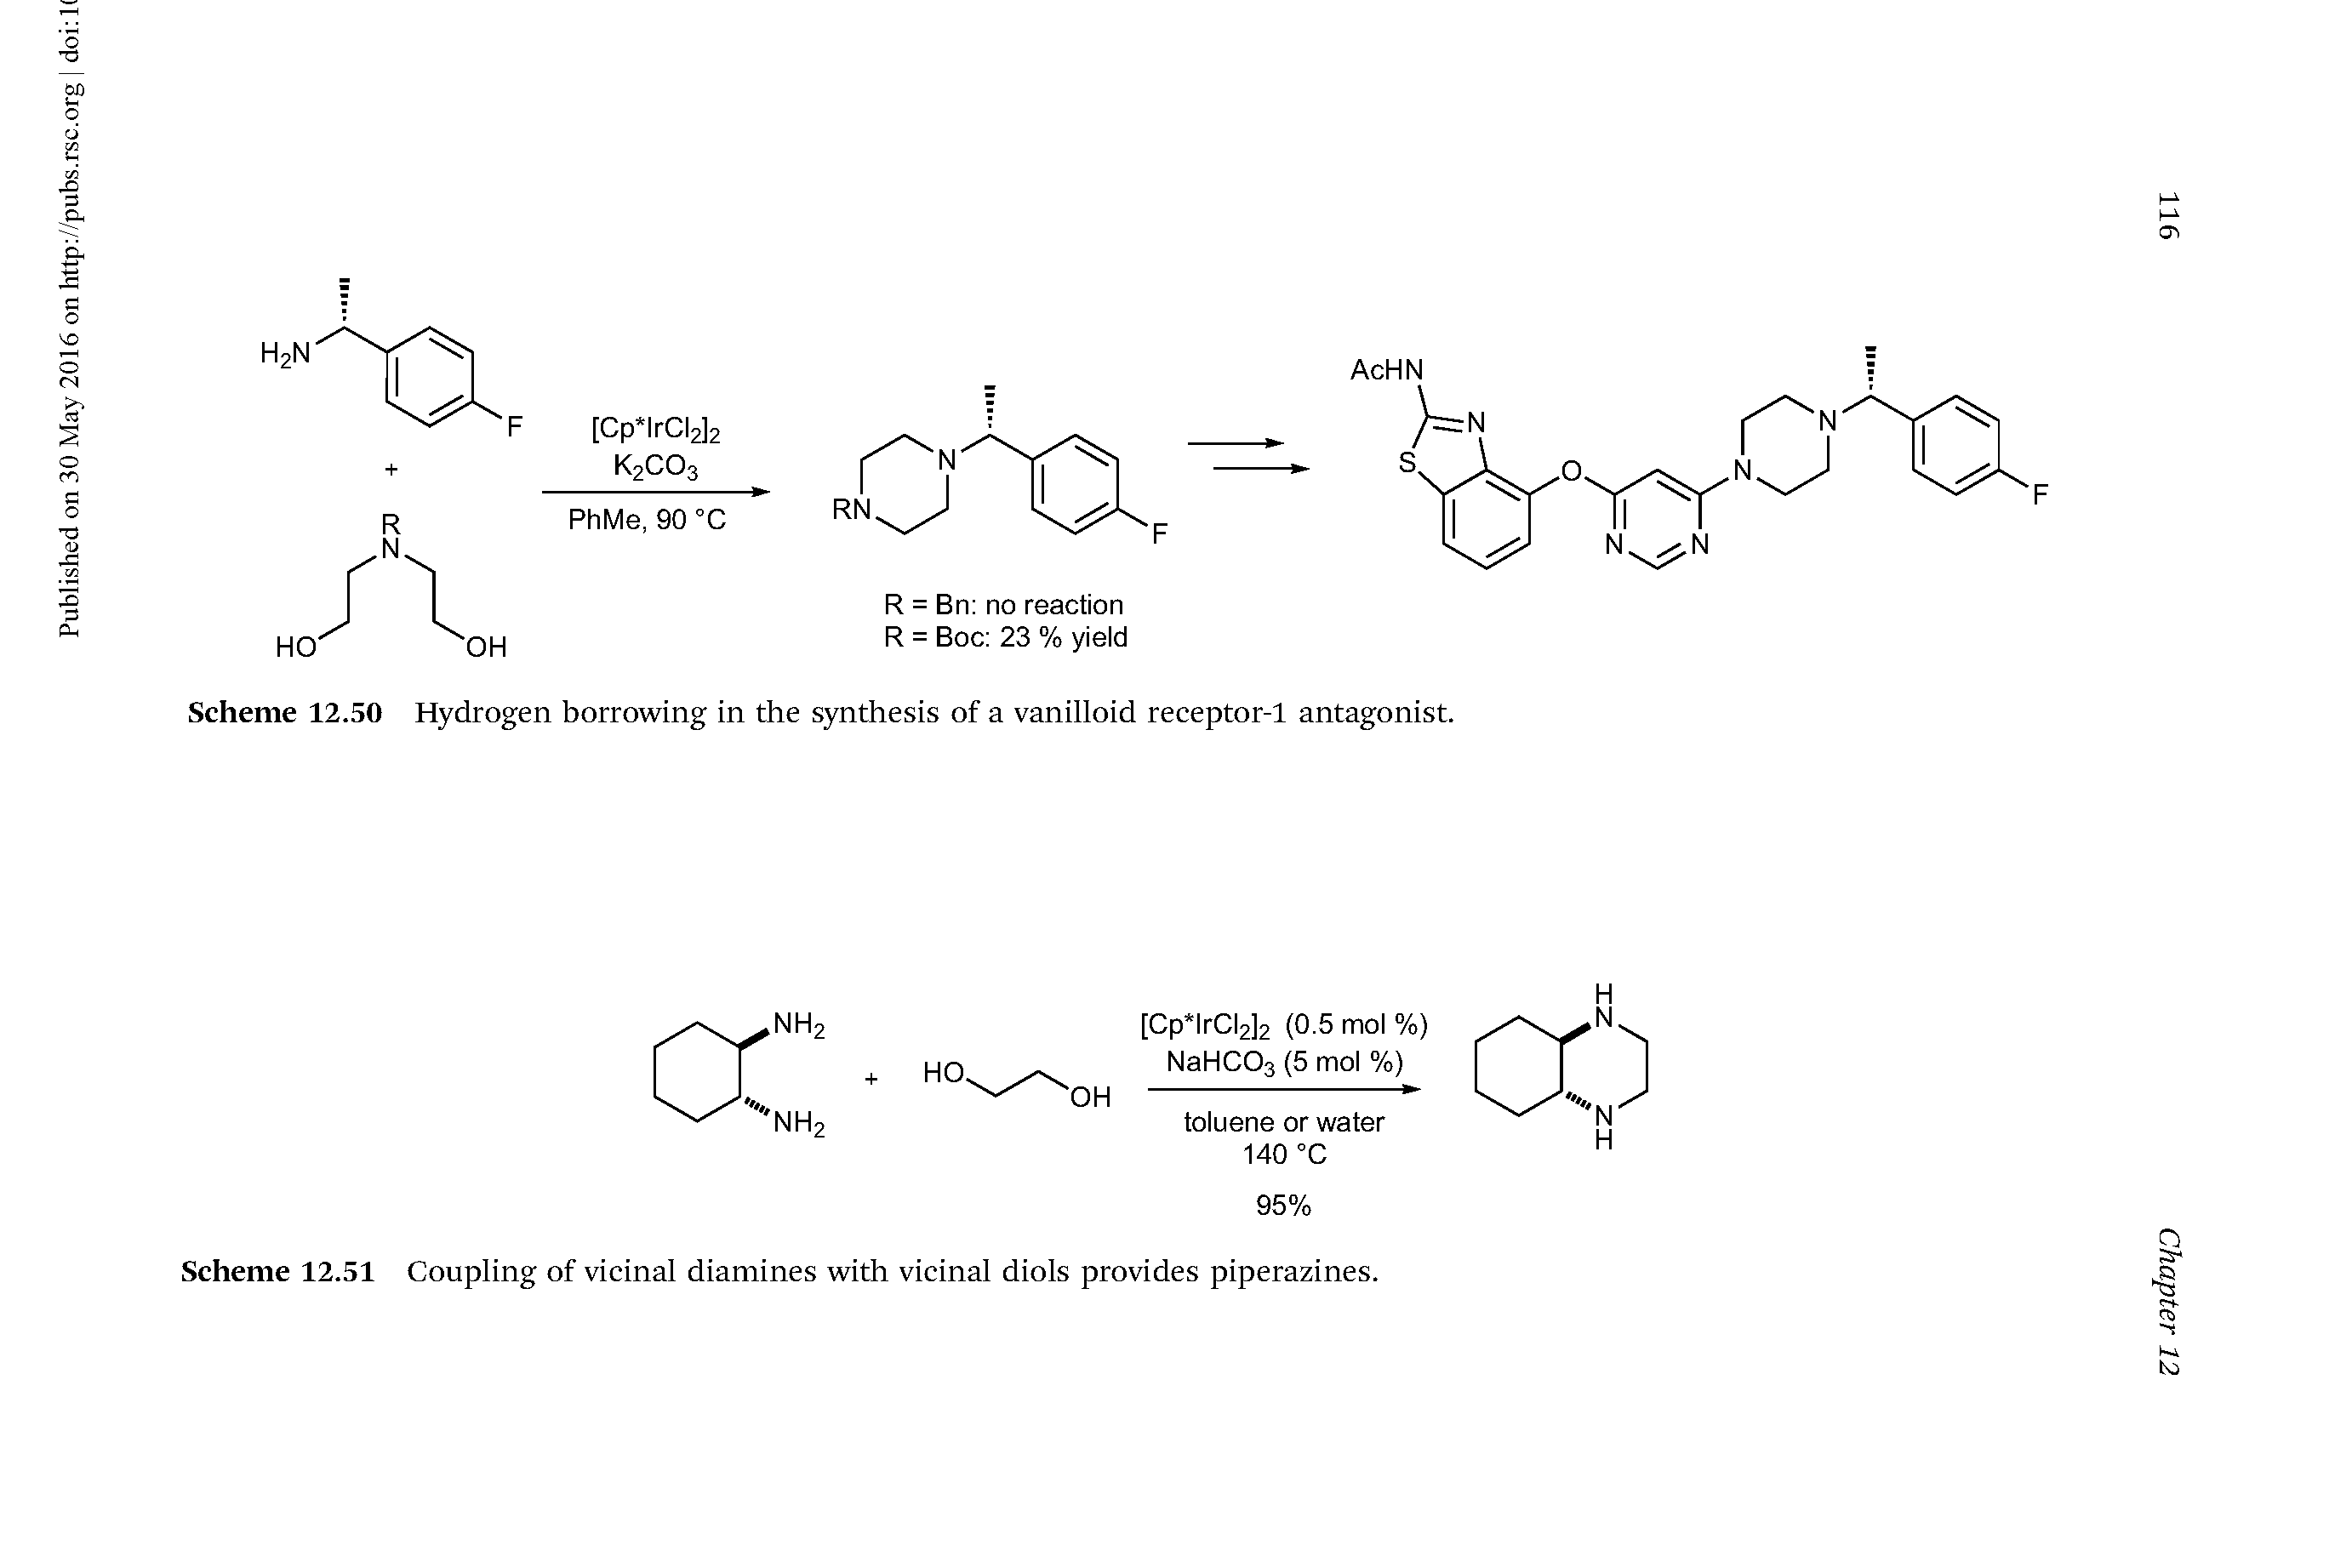 Scheme 12.51 Coupling of vicinal diamines with vicinal diols provides piperazines.